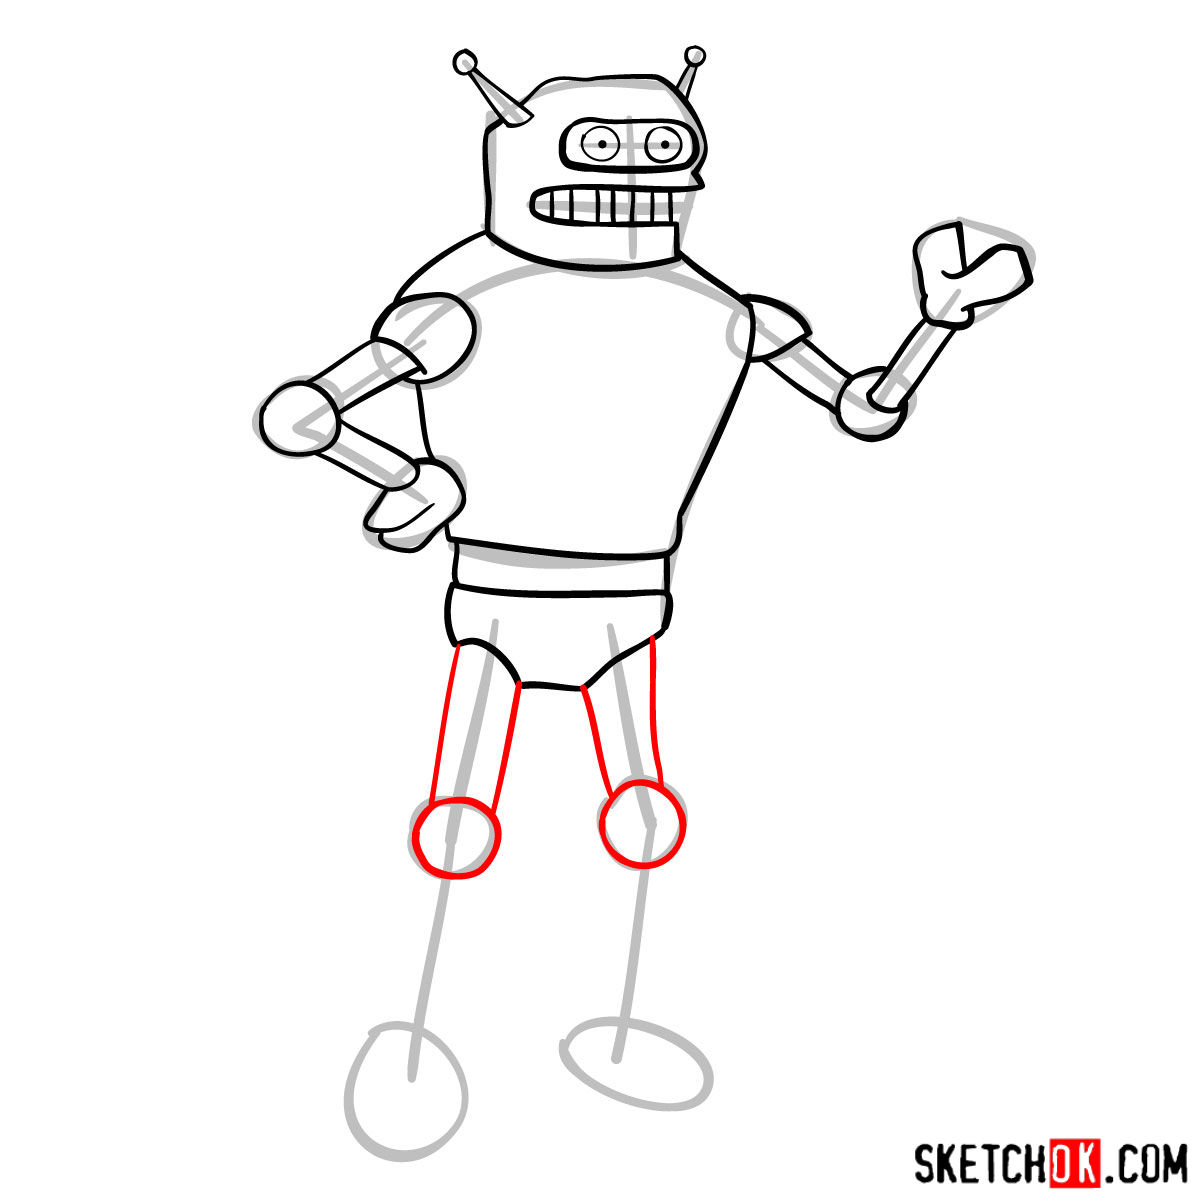 How to draw Calculon from Futurama - step 09